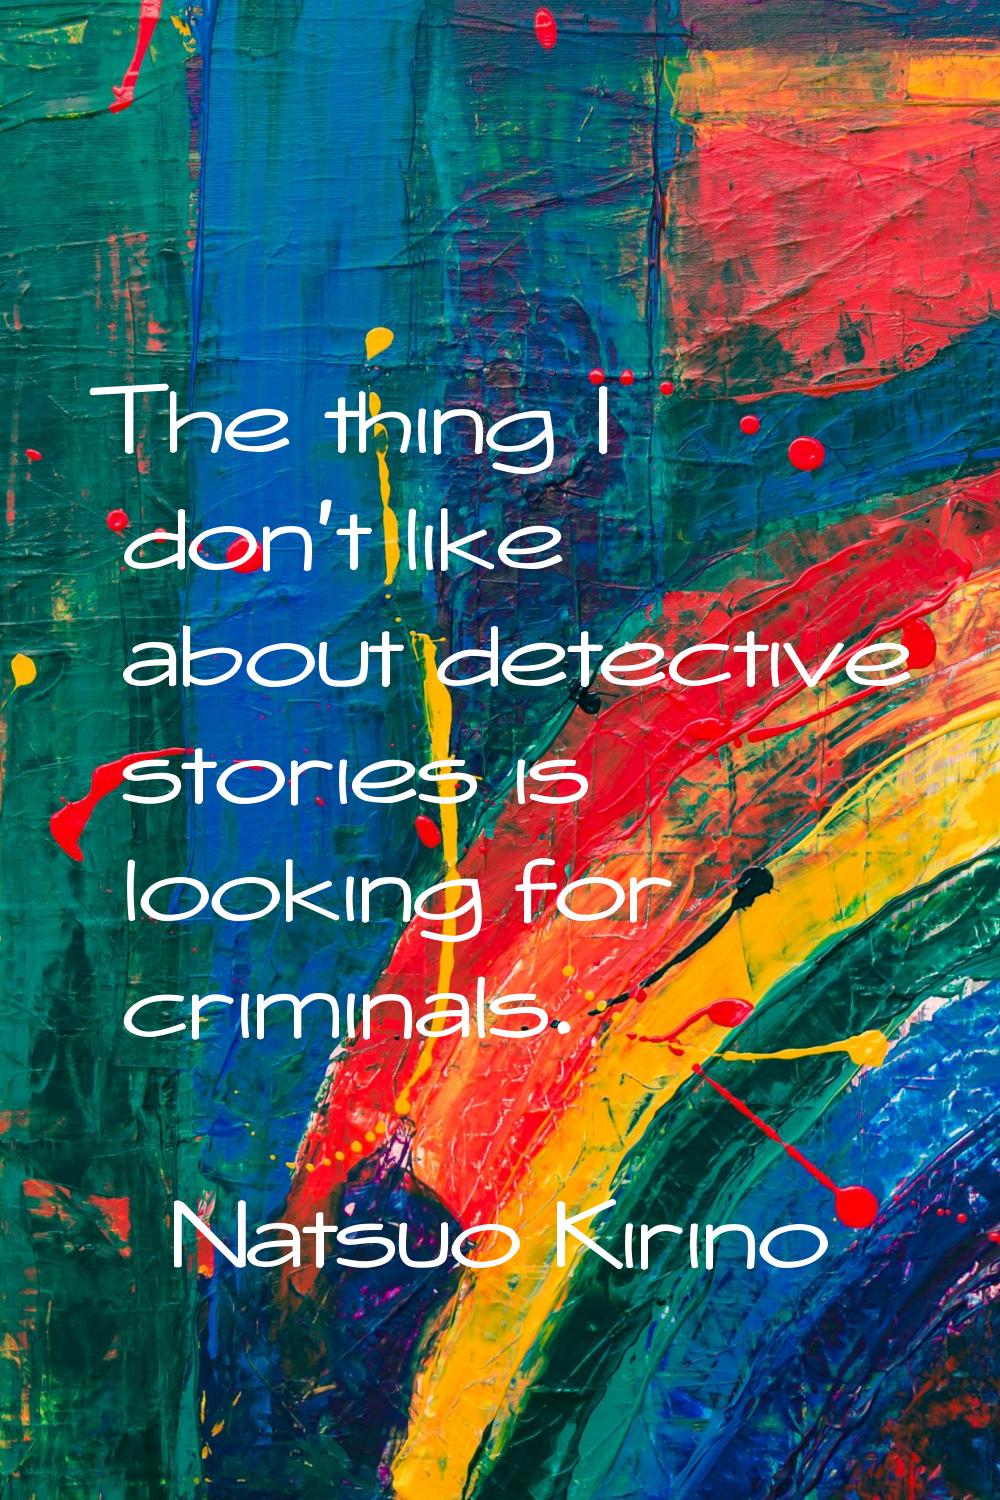 The thing I don't like about detective stories is looking for criminals.